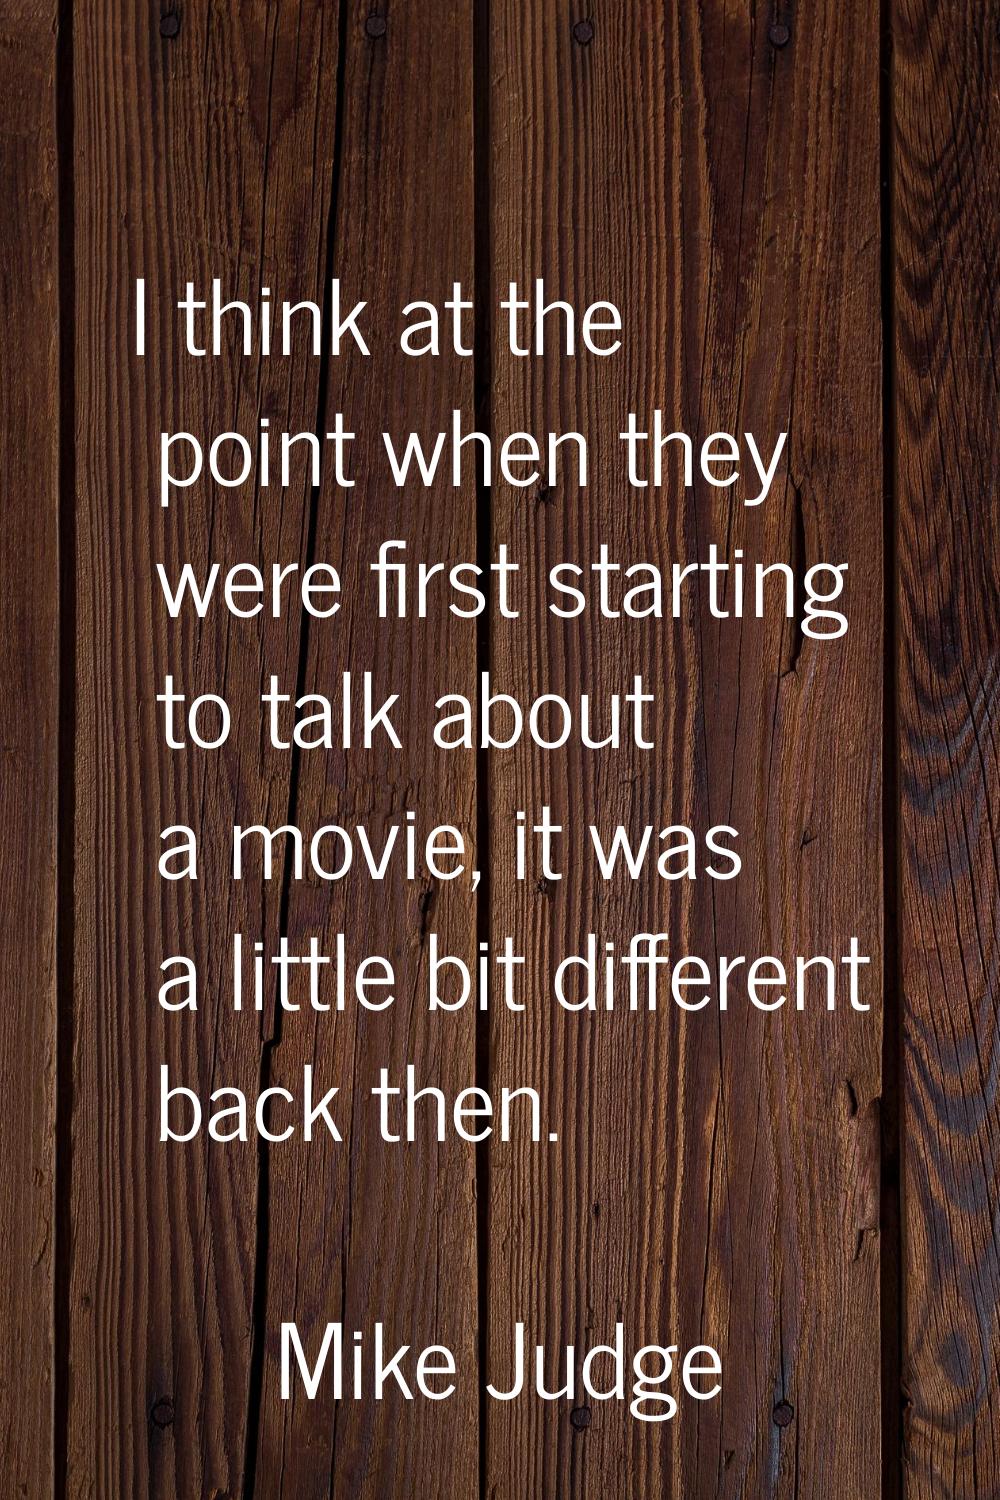 I think at the point when they were first starting to talk about a movie, it was a little bit diffe